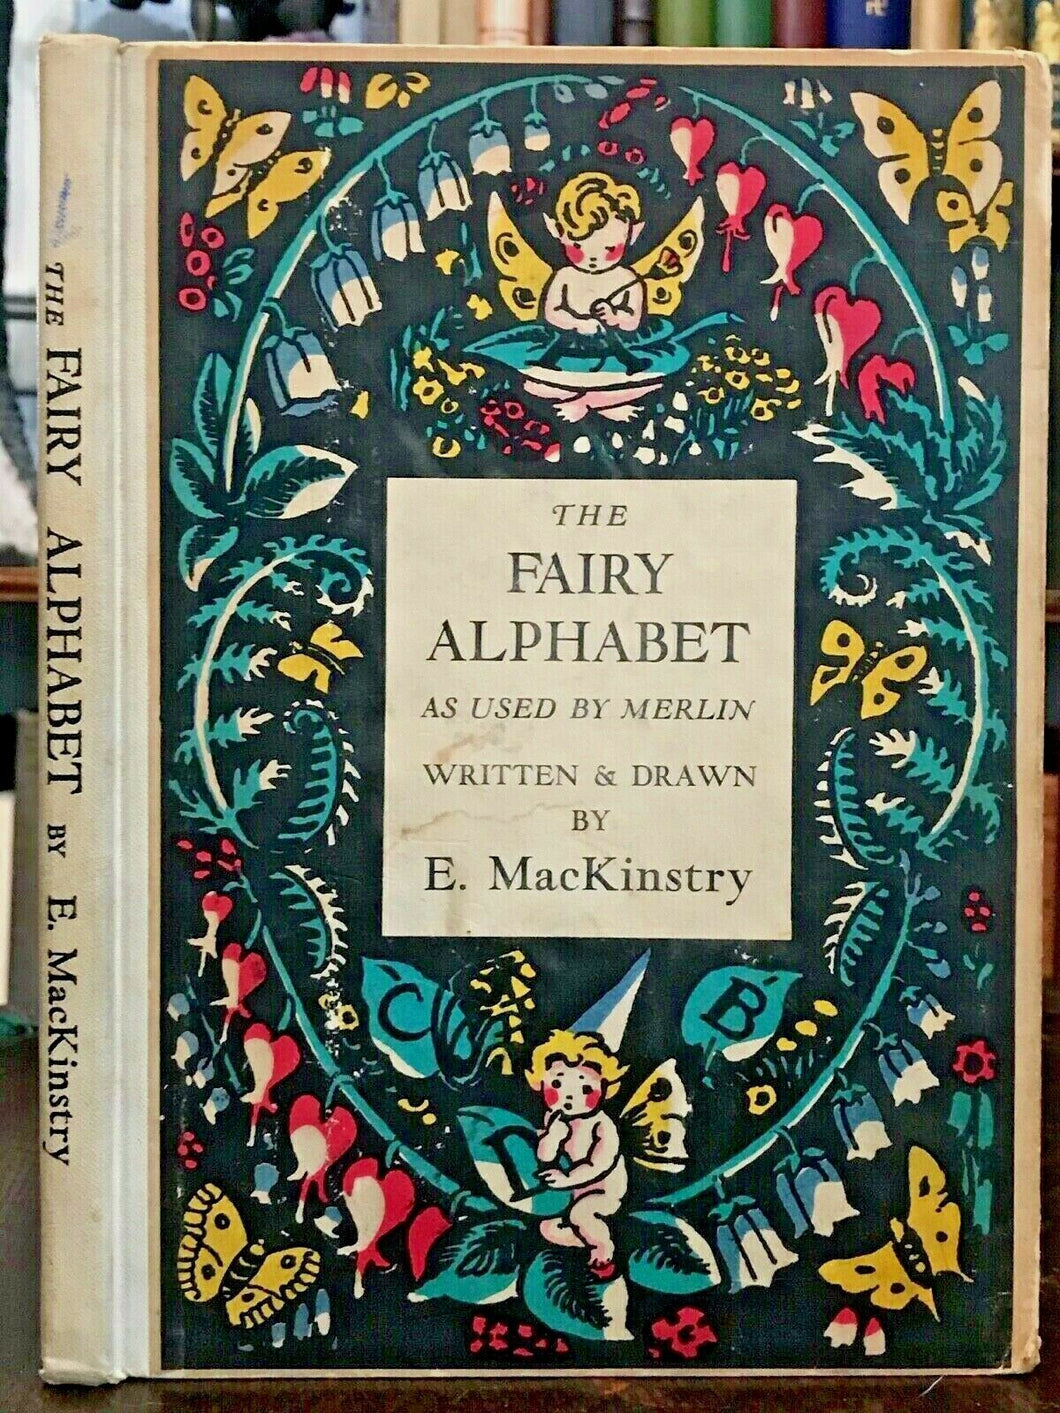 THE FAIRY ALPHABET AS USED BY MERLIN - MacKinstry, 1st 1933 ILLUSTRATED FAIRIES